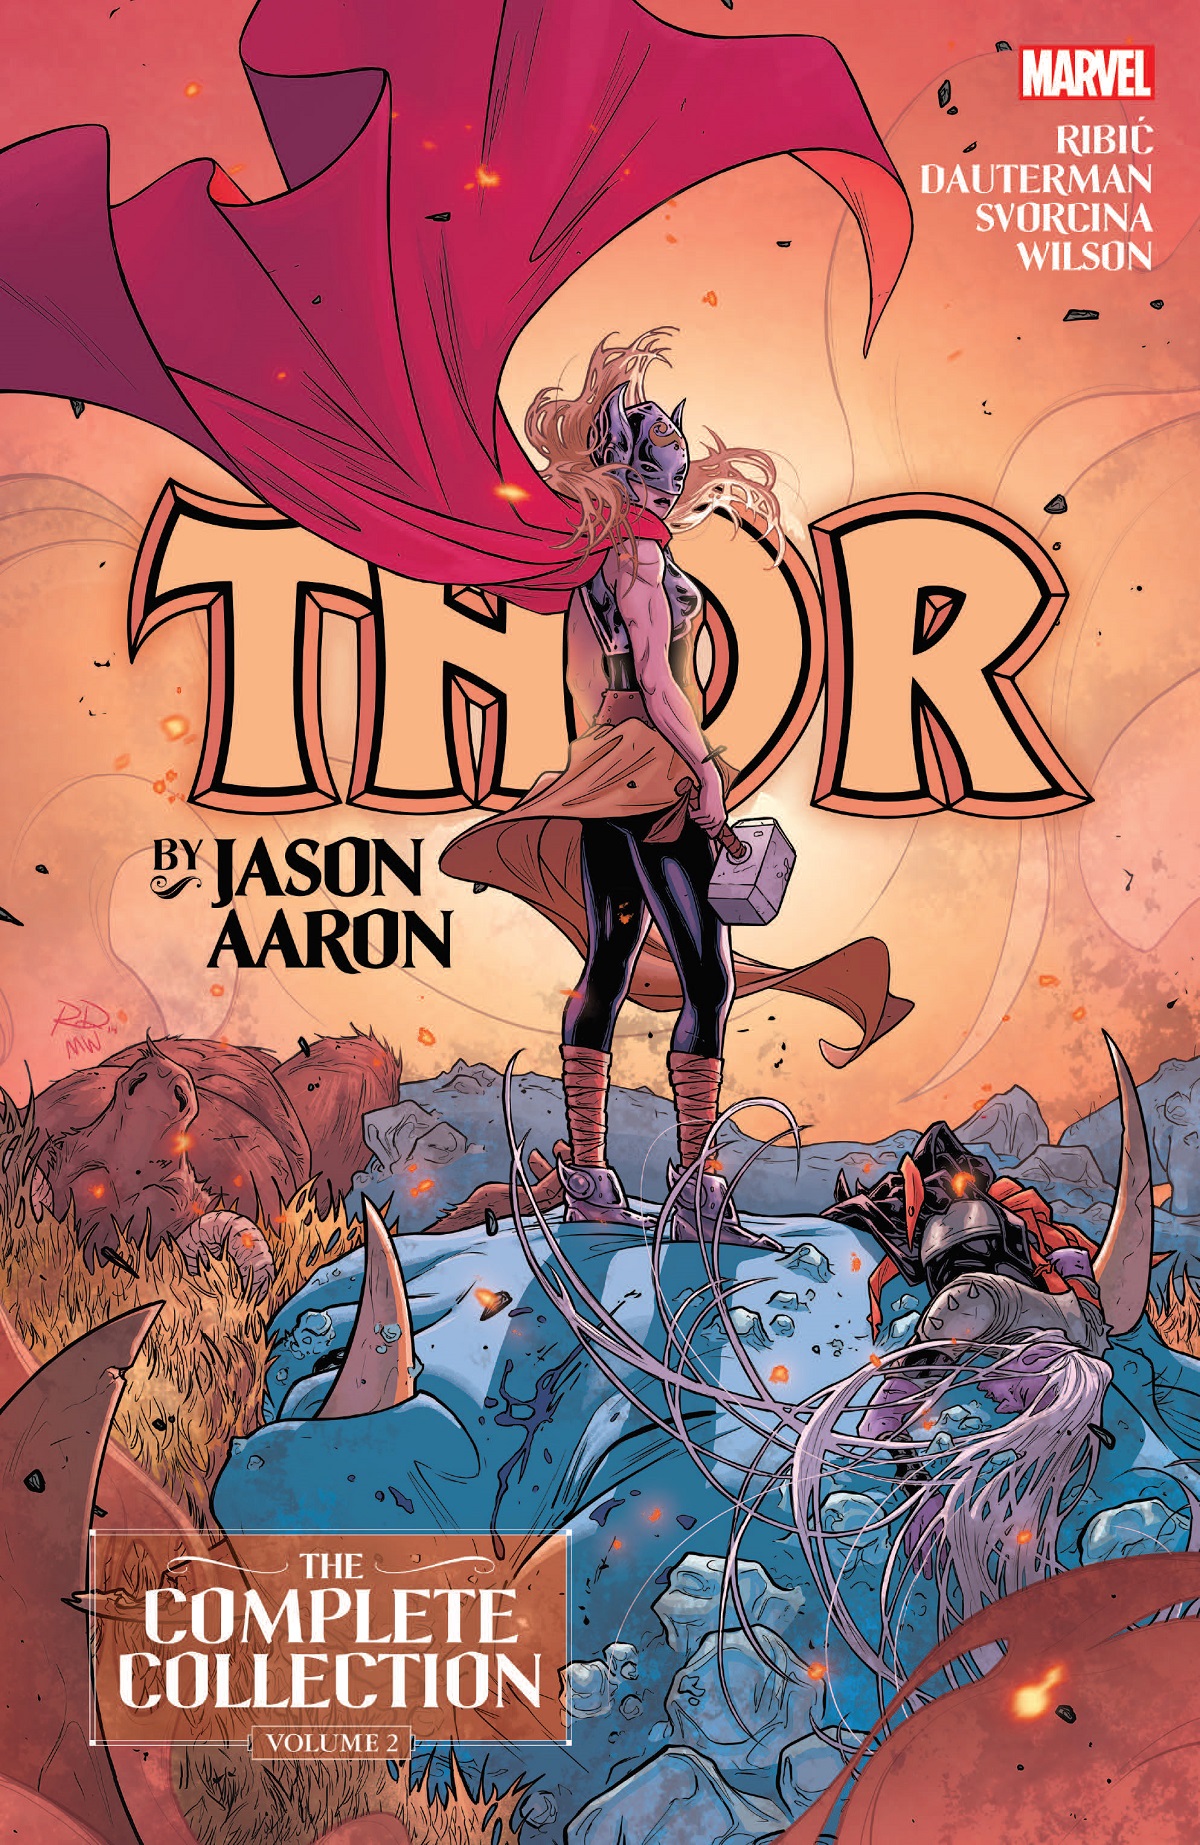 Thor by Jason Aaron: The Complete Collection Vol. 2 (Trade Paperback)